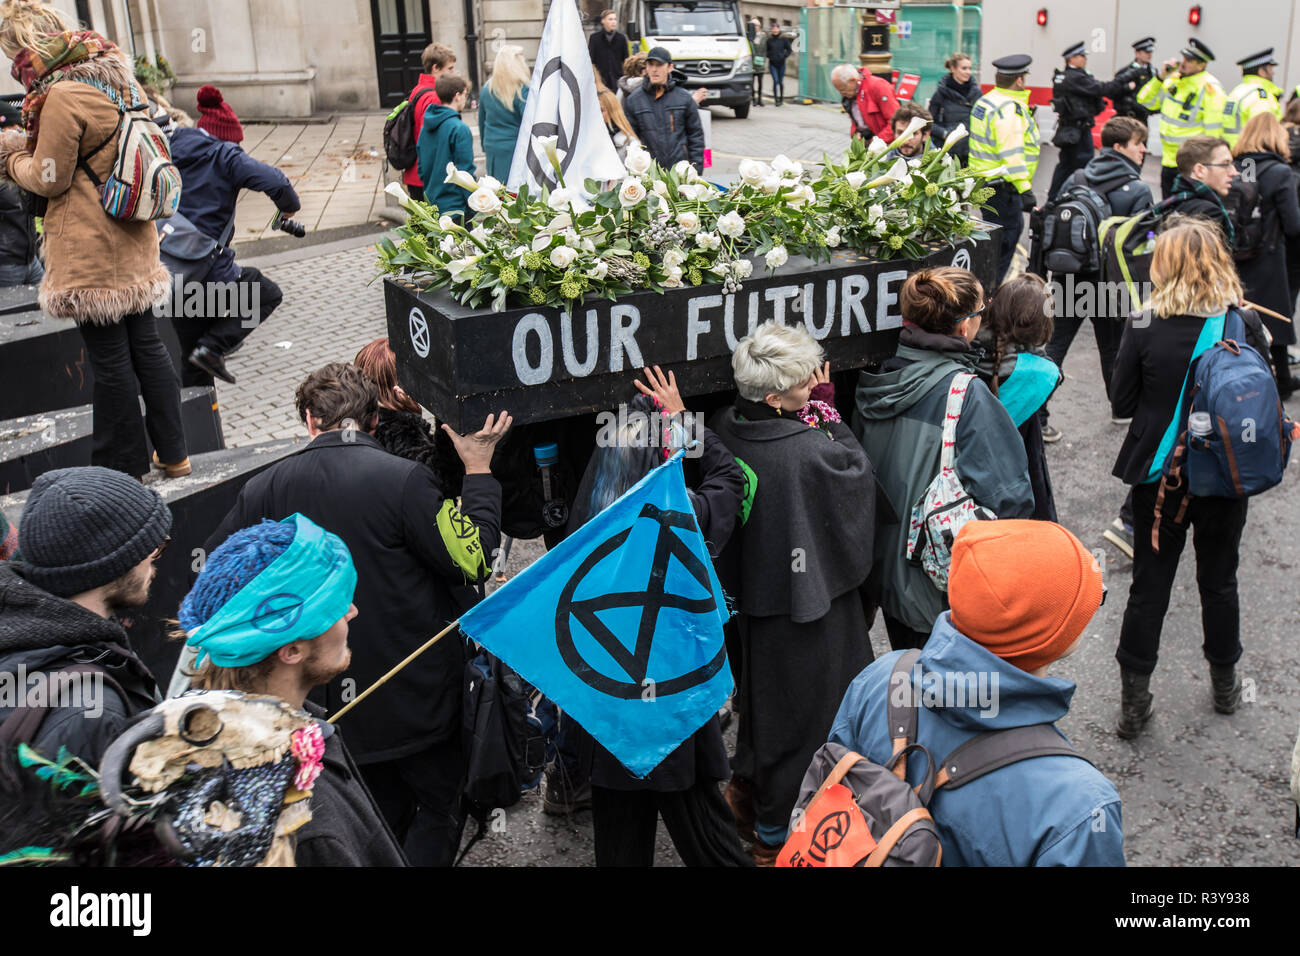 London, UK. 24th Nov 2018. 24 November, 2018. London,UK. 'Extinction Rebellion' climate protesters demonstrated in central London with a funeral procession which included a sit down outside Downing Street and a march to Buckingham Palace. David Rowe/ Alamy Live News. Stock Photo